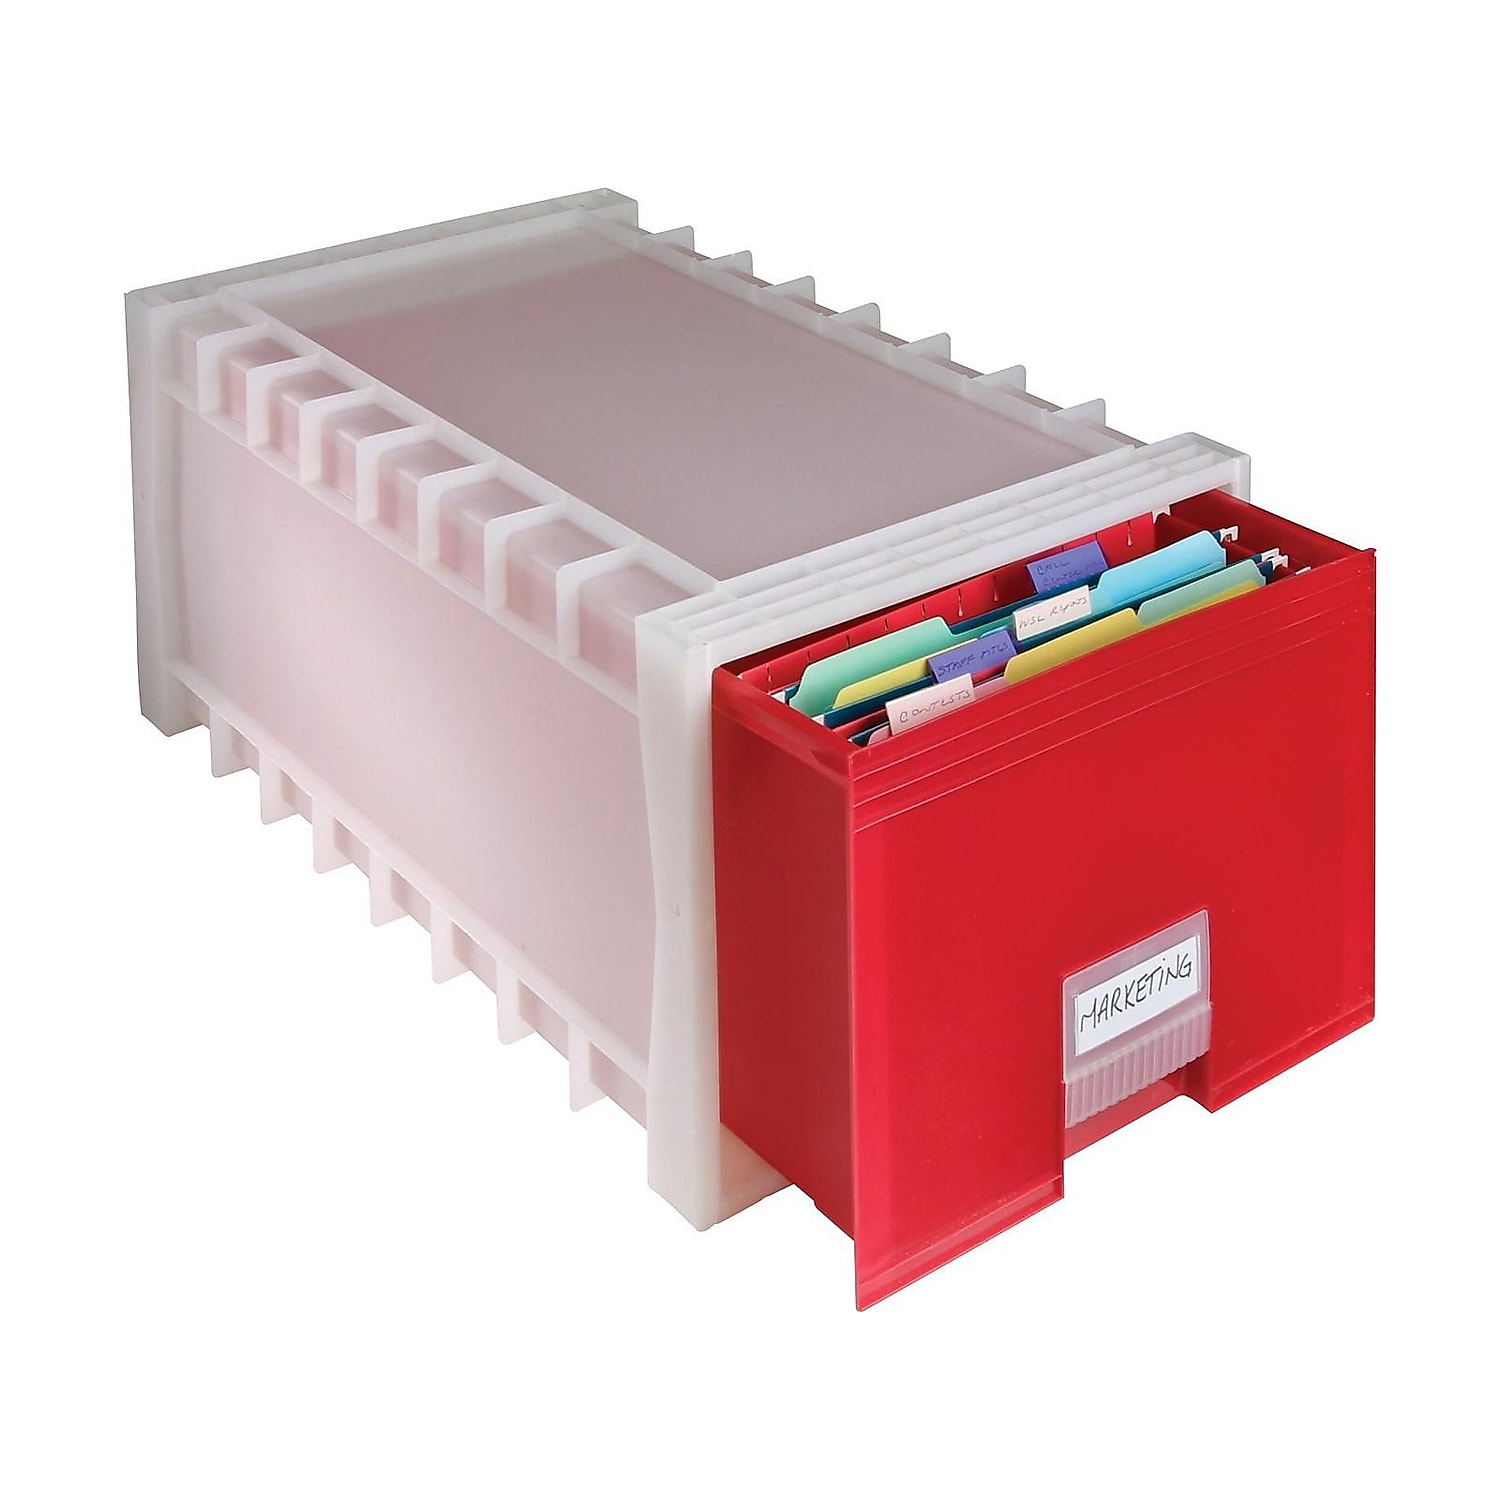 Storex  Plastic Archive Storage Box with Letter & Legal Size & 24 in. Drawer, White & Red - image 2 of 3